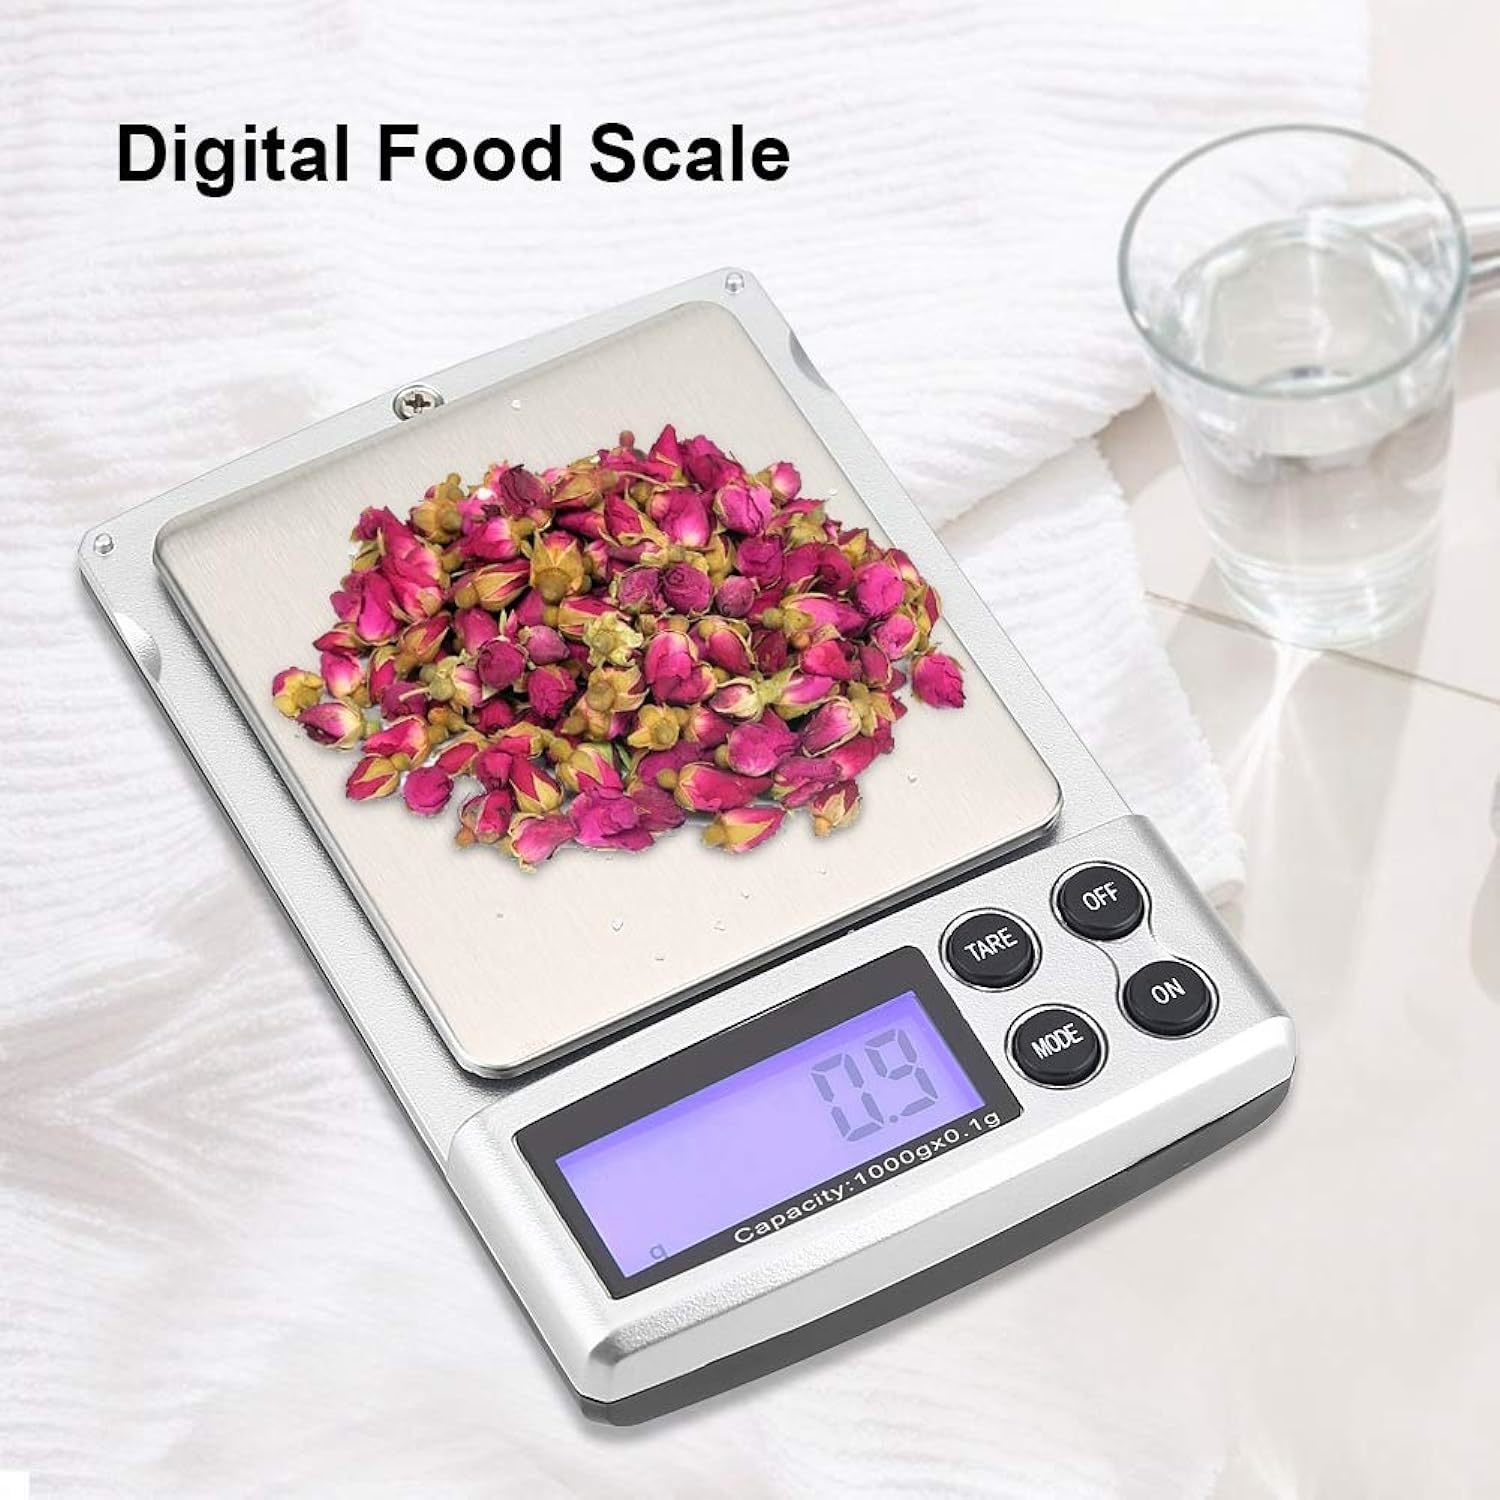 All Metal Kitchen Scale Manual 22-lbs 10-Kilo Balanza de Cocina Stainless Steel Red